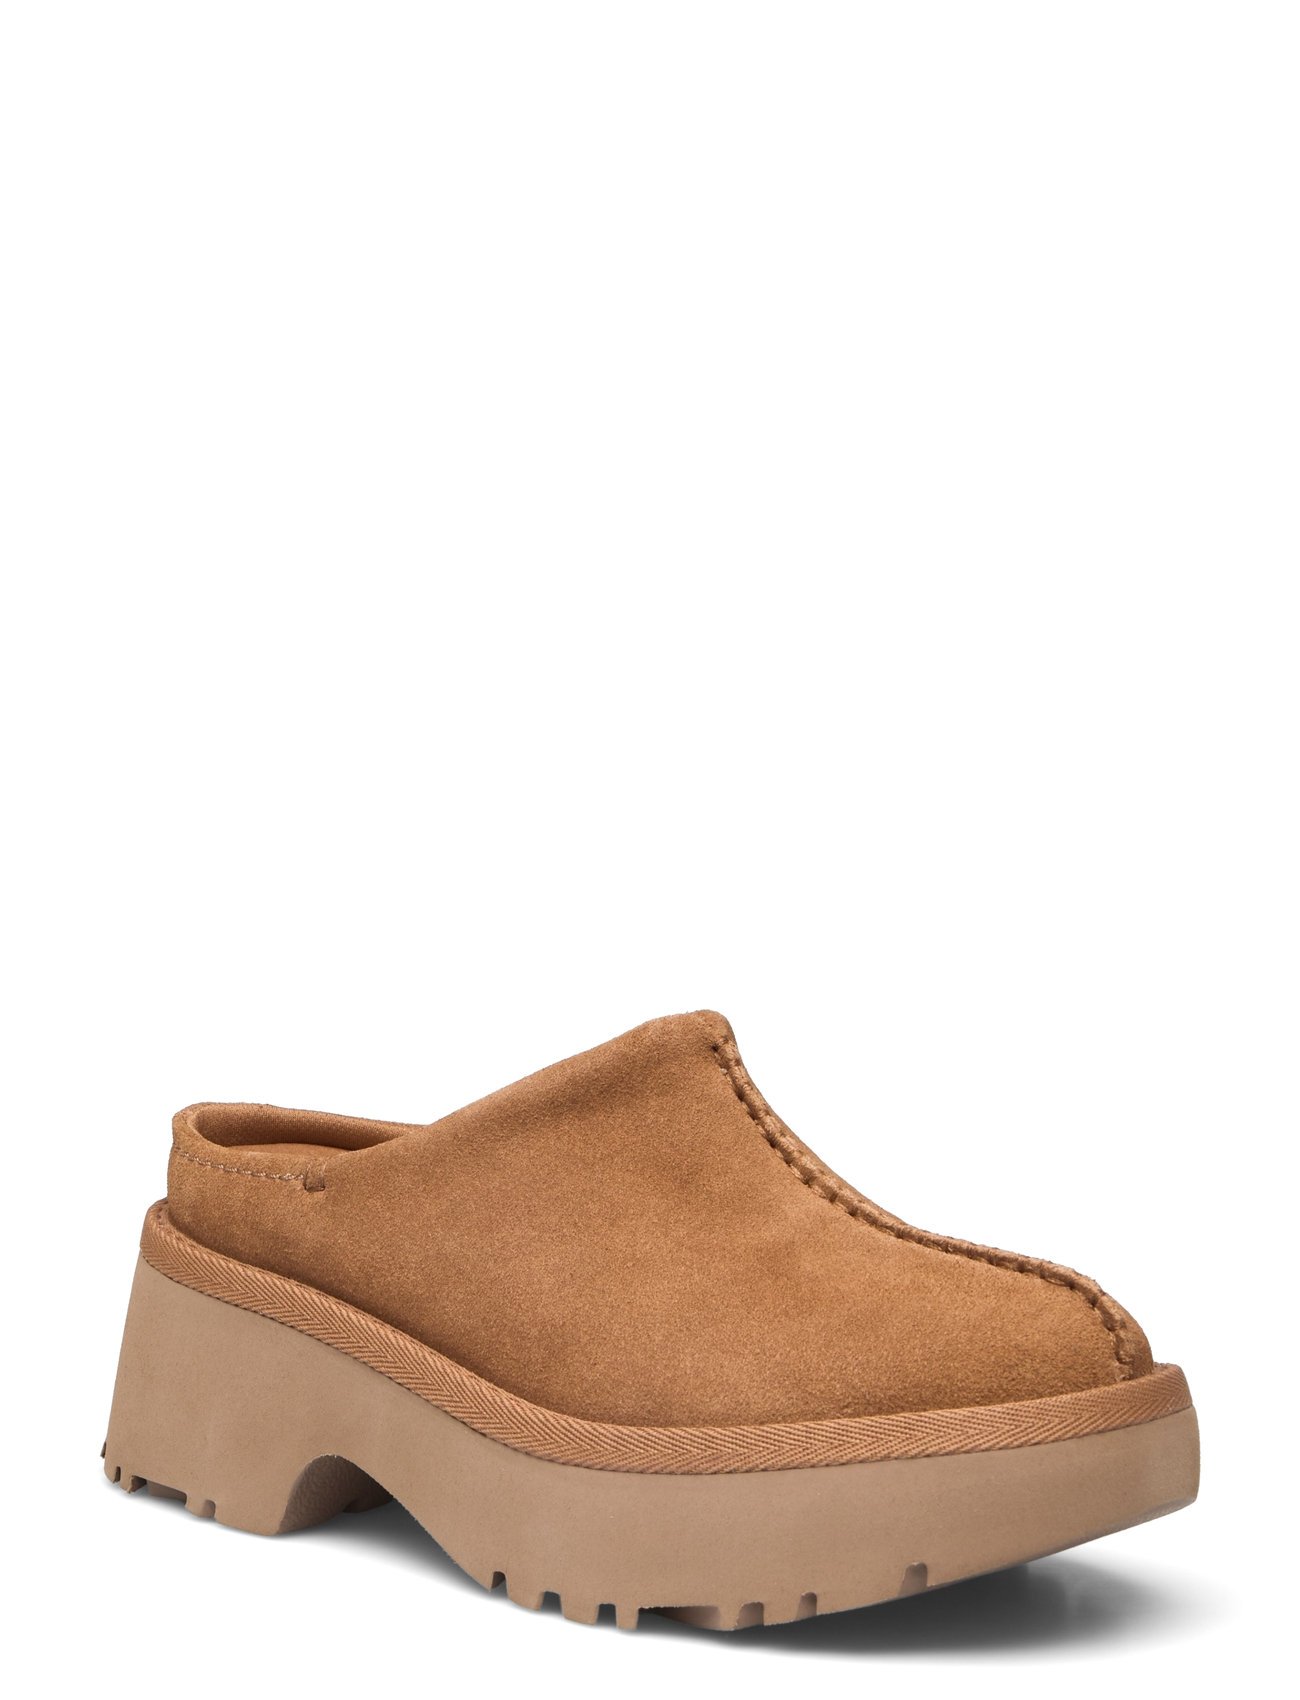 W New Heights Clog Designers Clogs Brown UGG